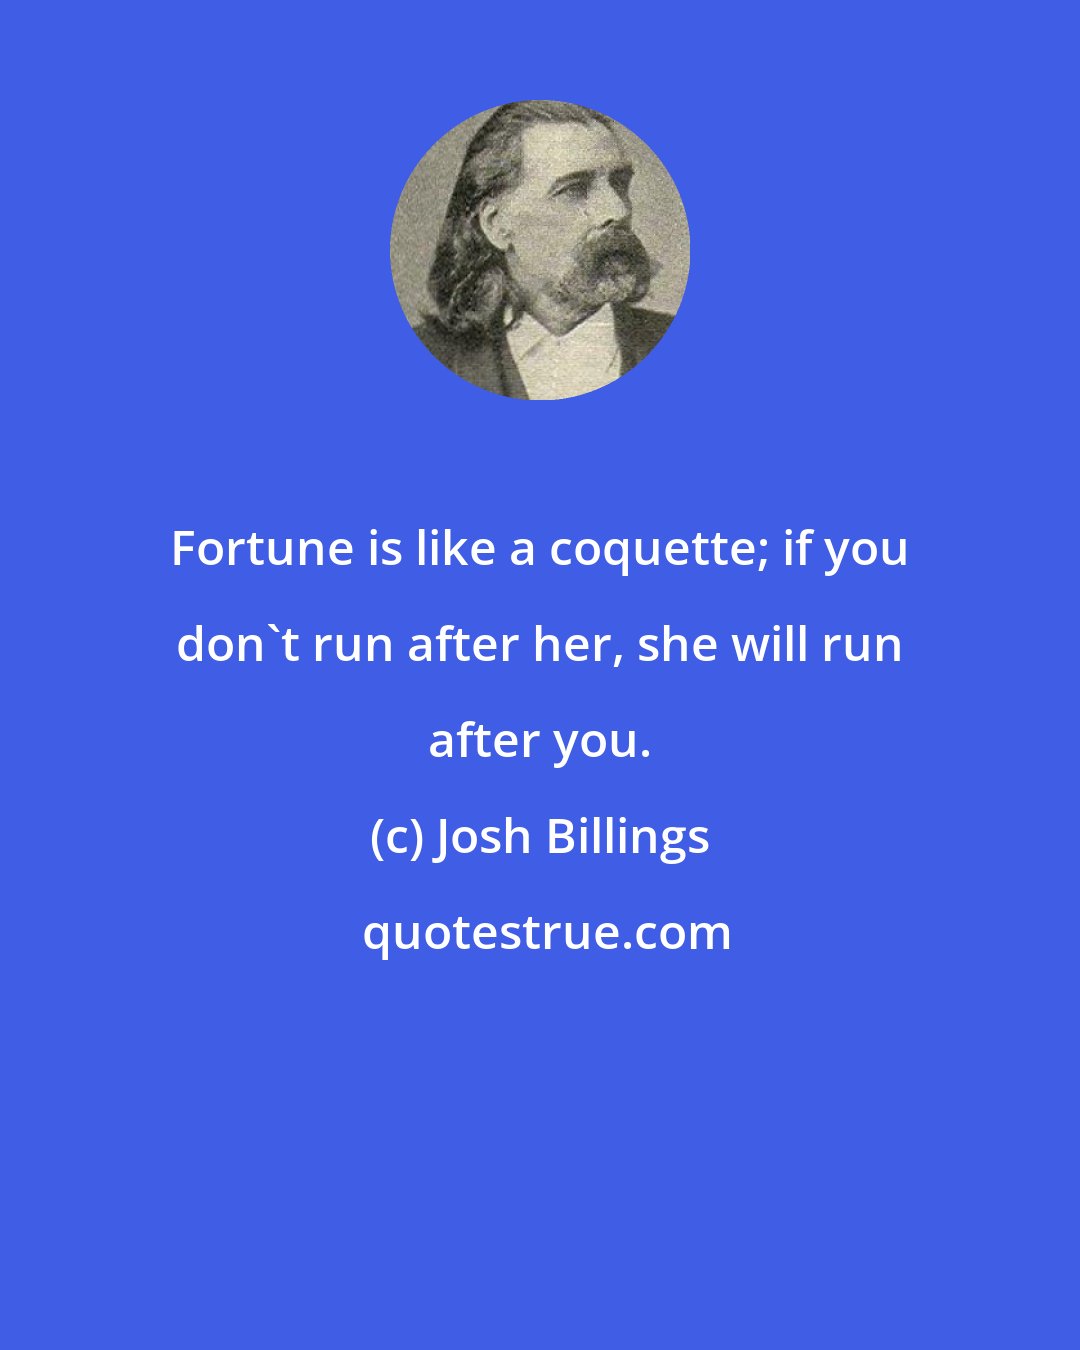 Josh Billings: Fortune is like a coquette; if you don't run after her, she will run after you.